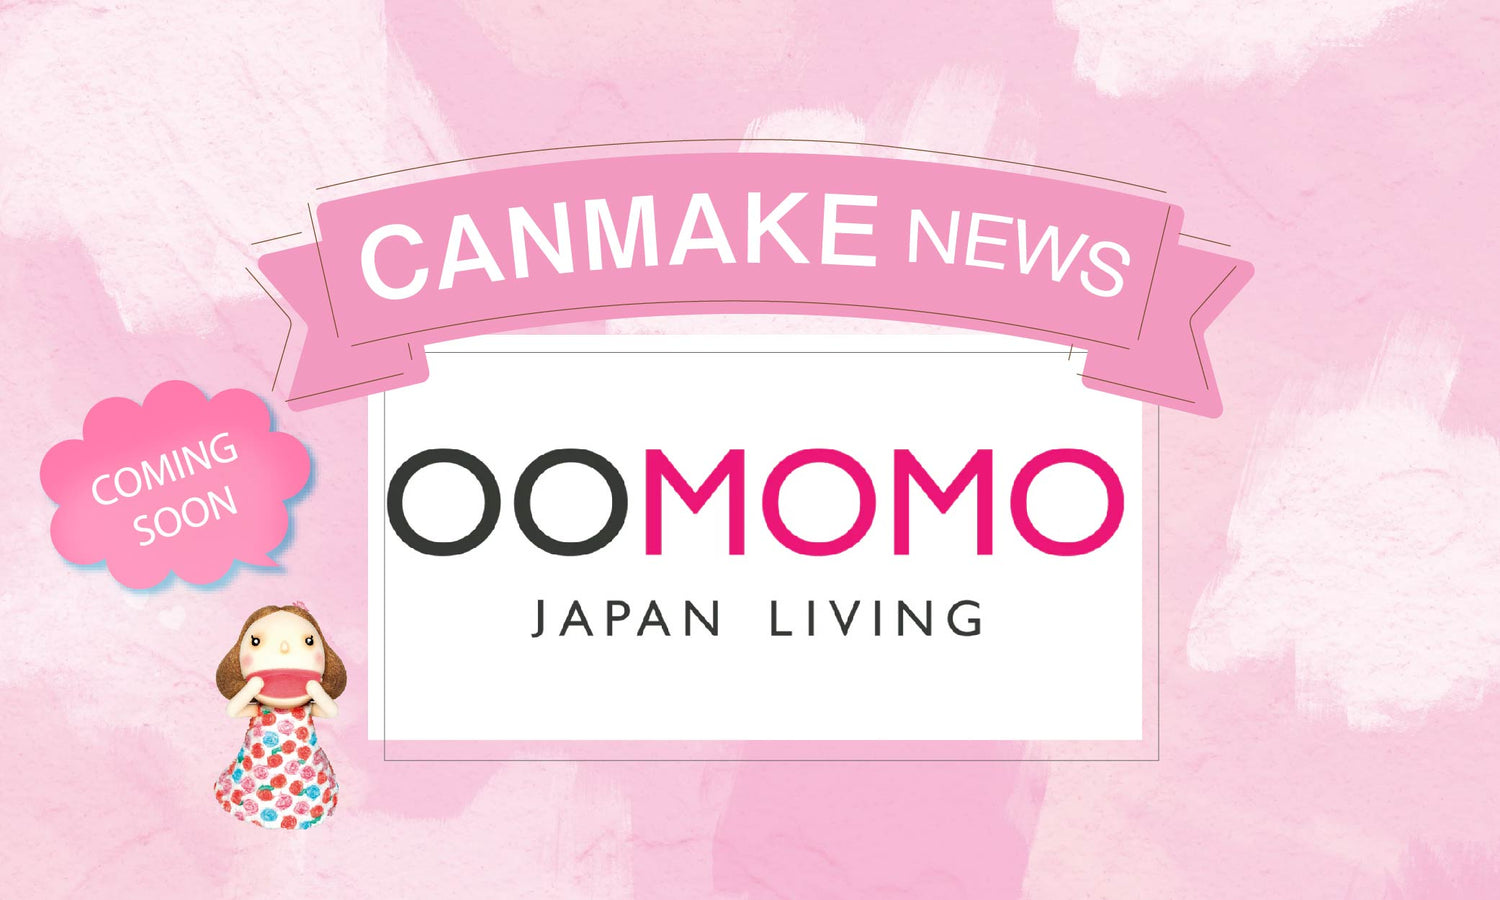 We are excited to announce the upcoming launch of the CANMAKE Full line at OOMOMO Japan living store, soon to be available in Canada.